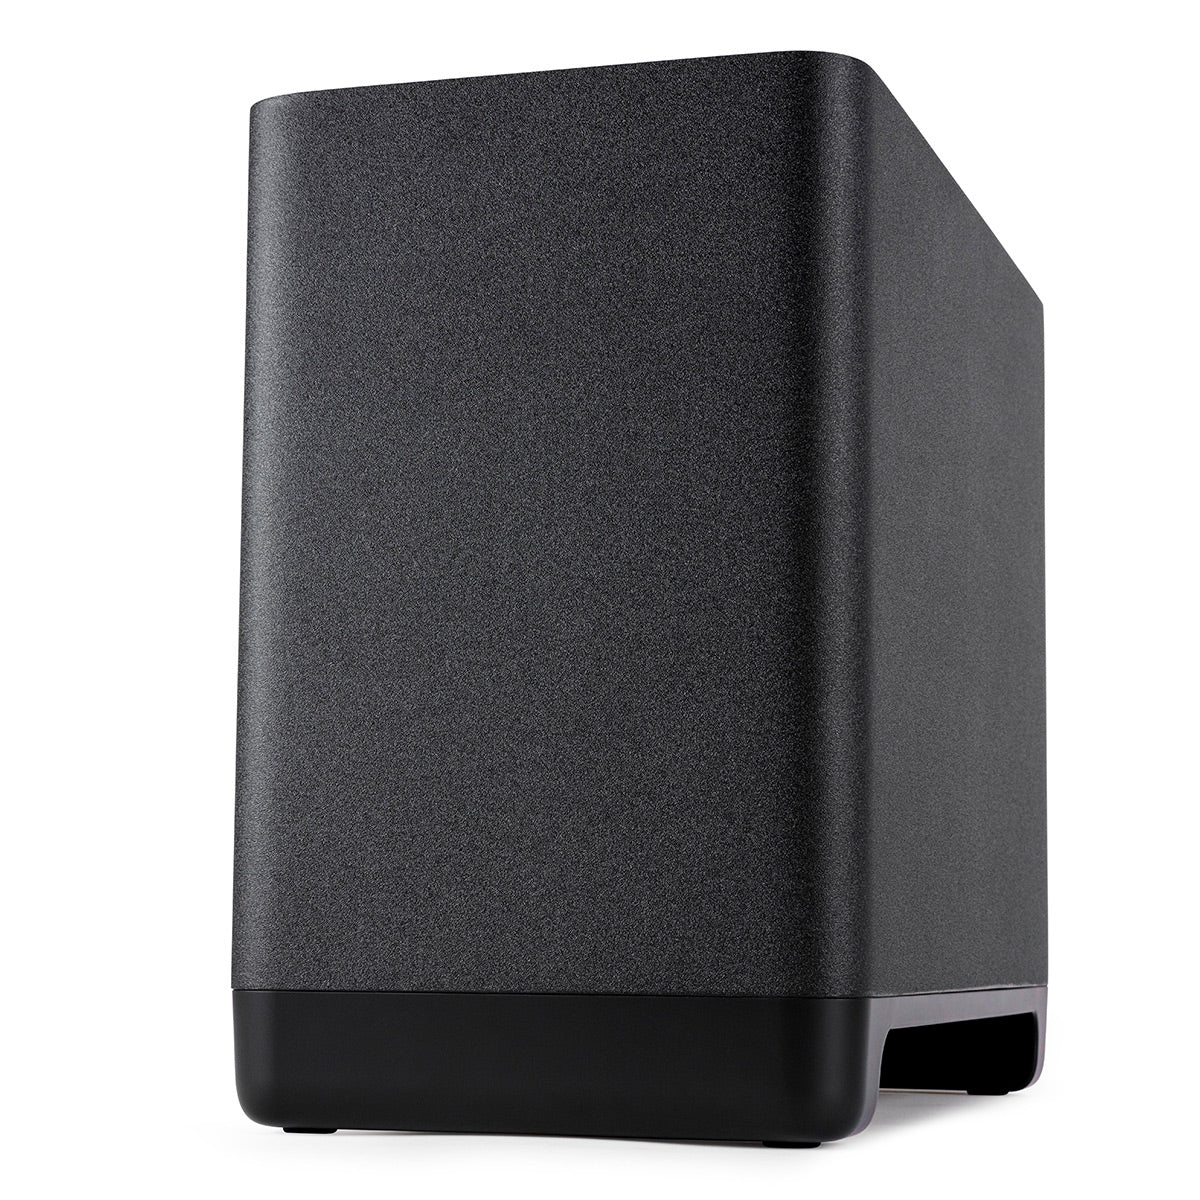 Sub: The World's Best Wireless Subwoofer For Home